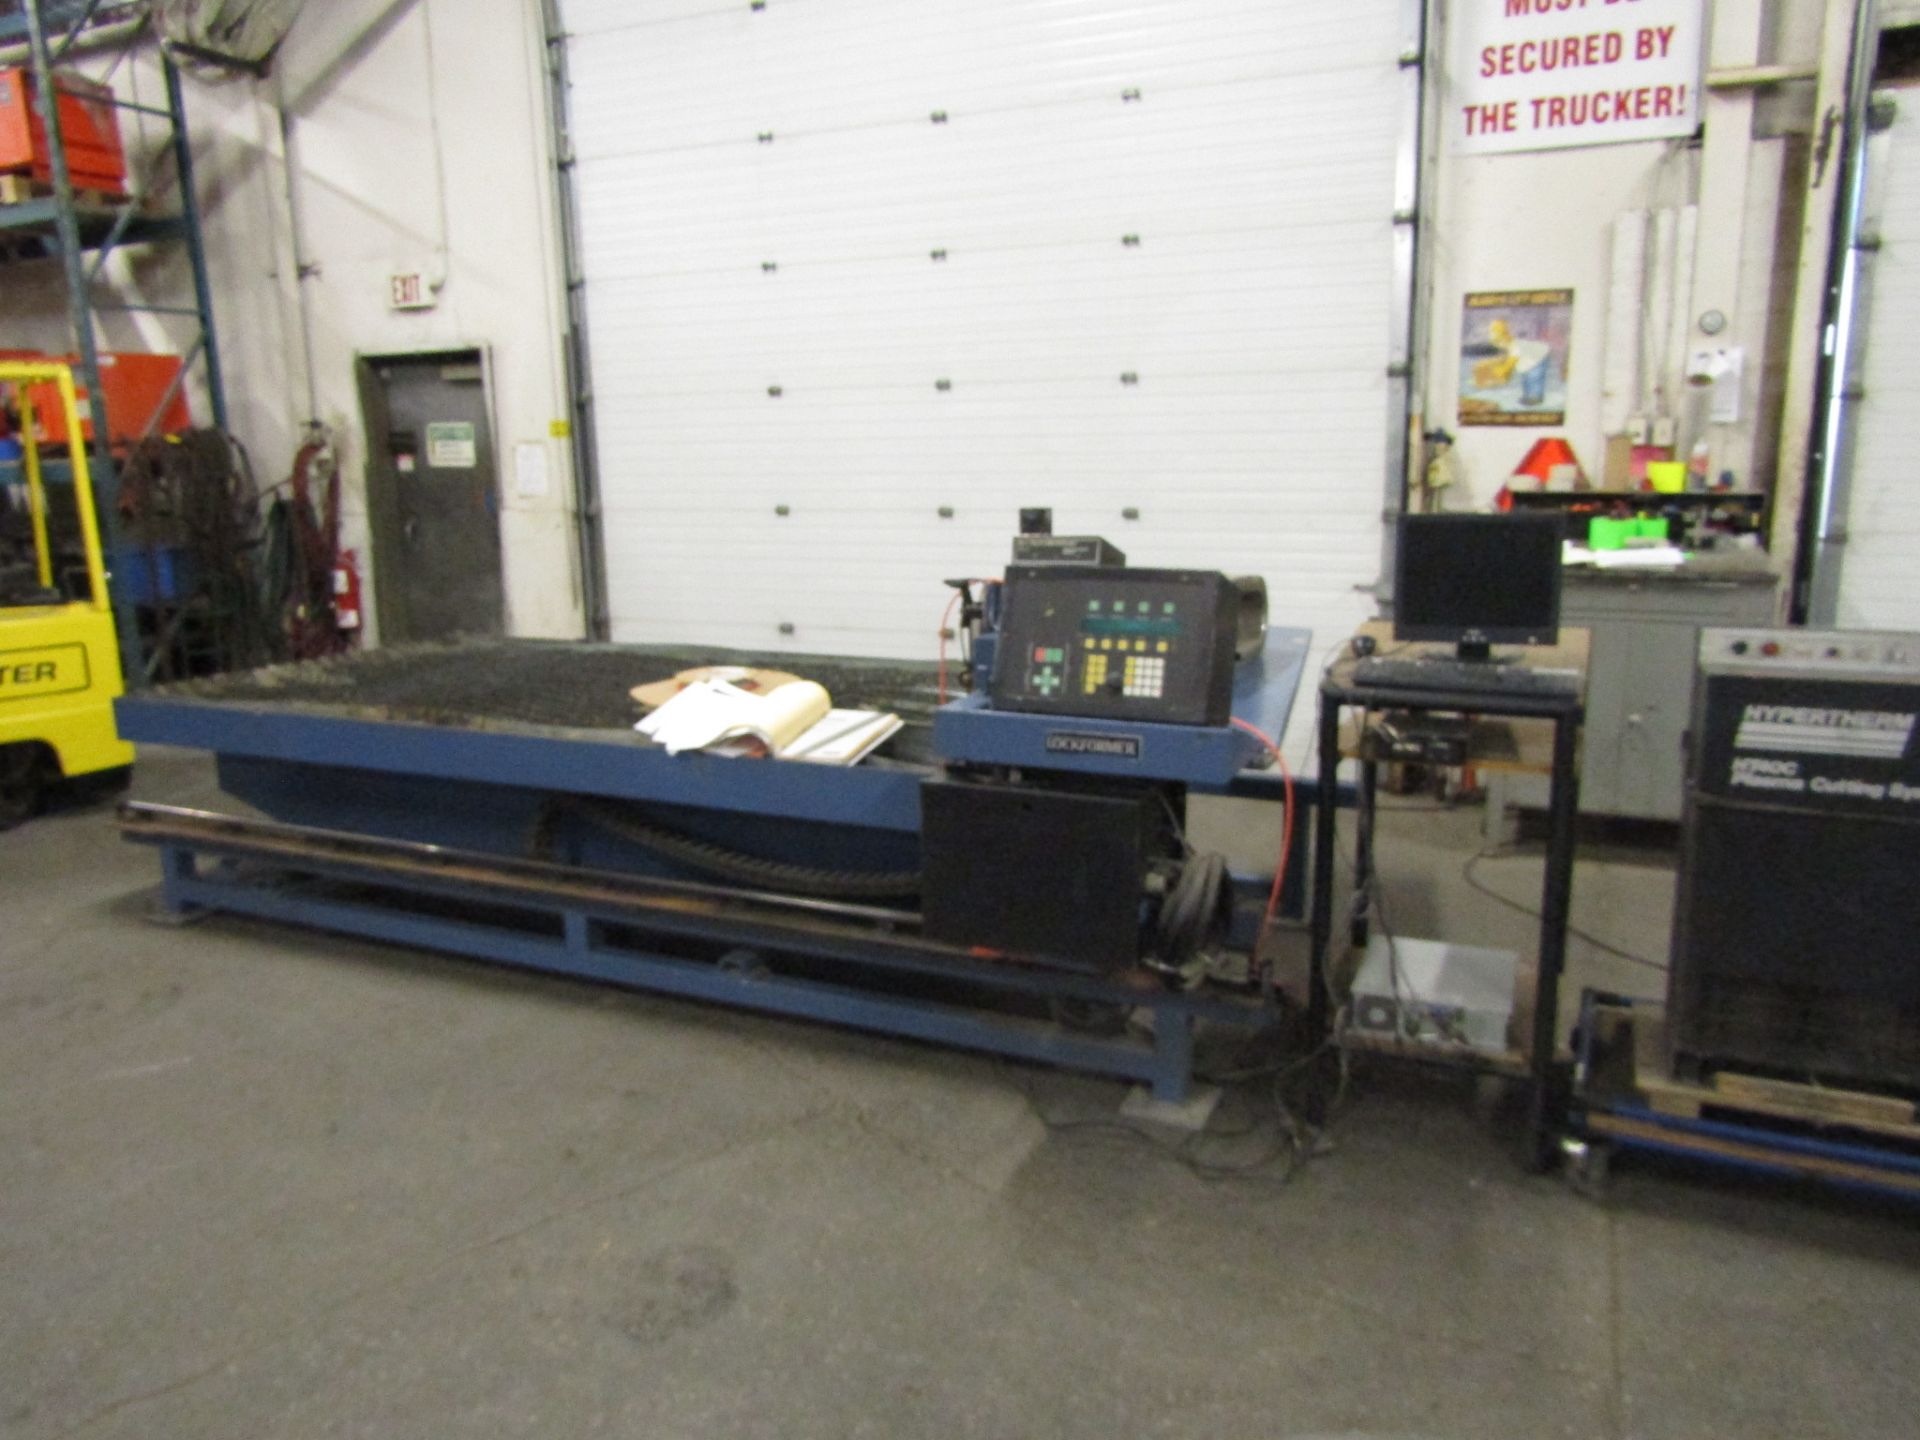 Hypertherm Plasma Cutting Table - 5' x 10' with HT40C Plasma Cutting System - EXTREMELY LOW HOURS